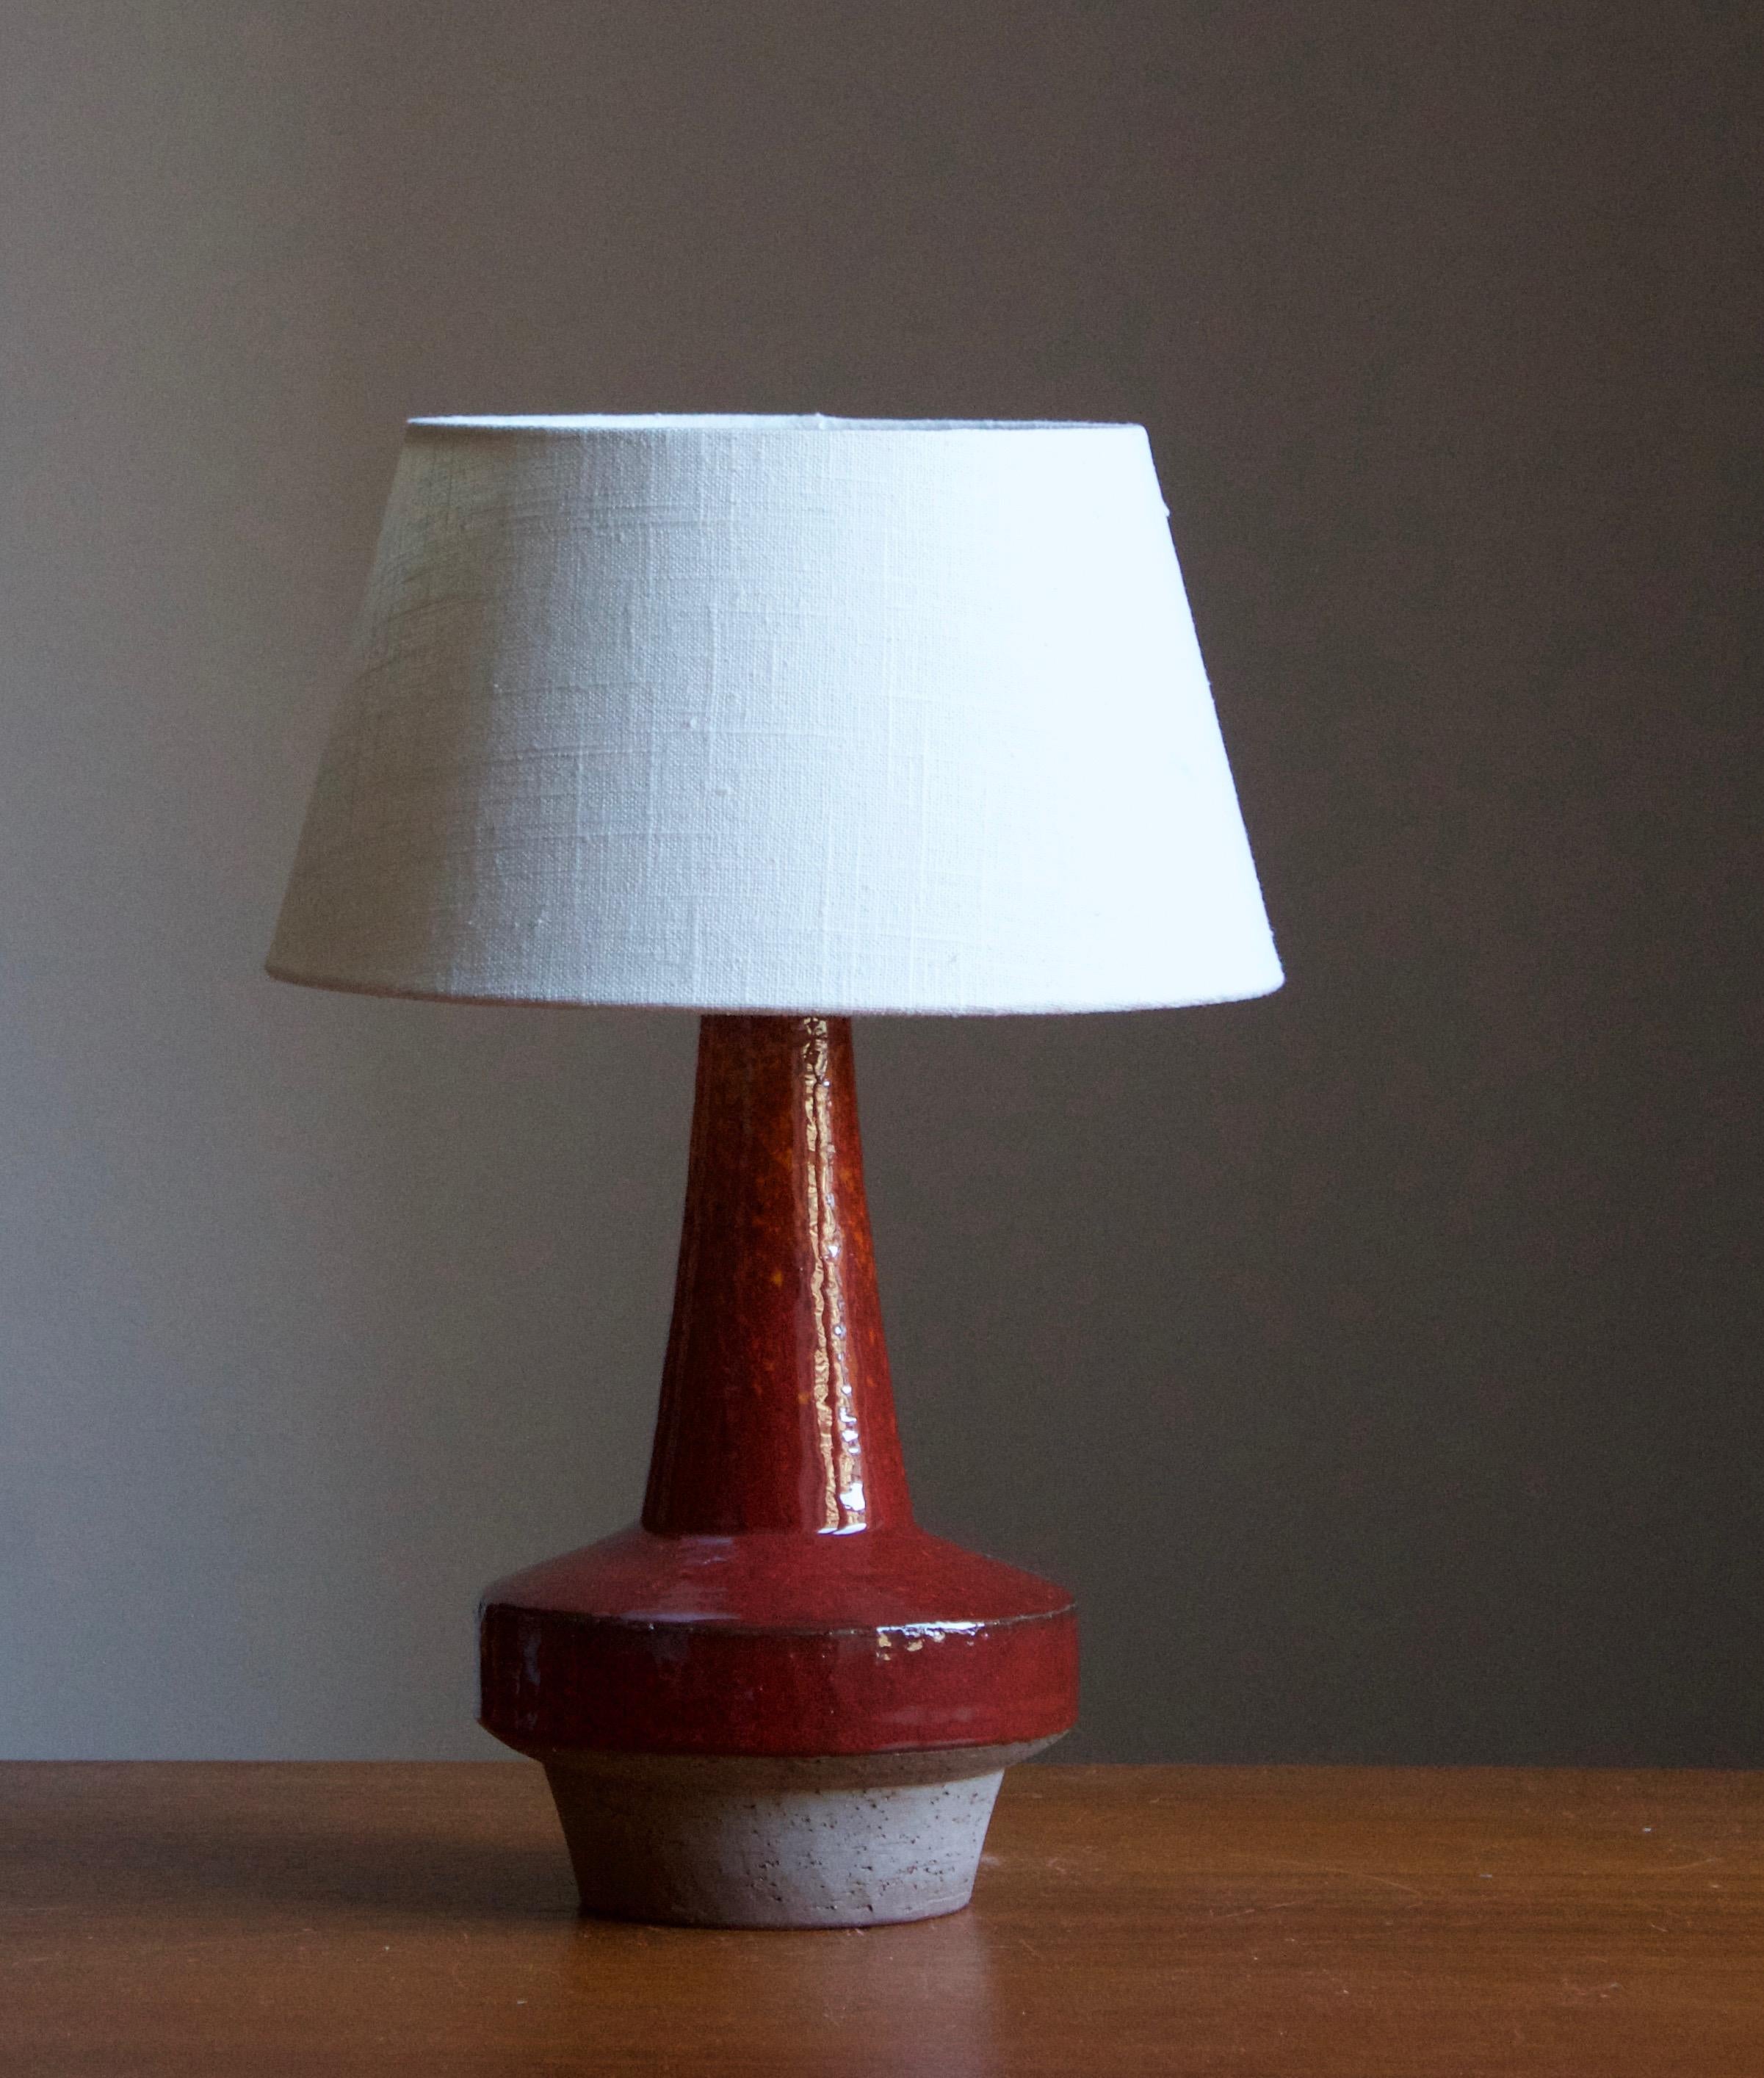 A table lamp produced by Michael Andersen Keramik. In stoneware. Marked.

Stated dimensions exclude lampshade. Height includes socket. Sold without lampshade.

Other ceramicists of the period include Axel Salto, Arne Bang, Carl-Harry Stålhane,